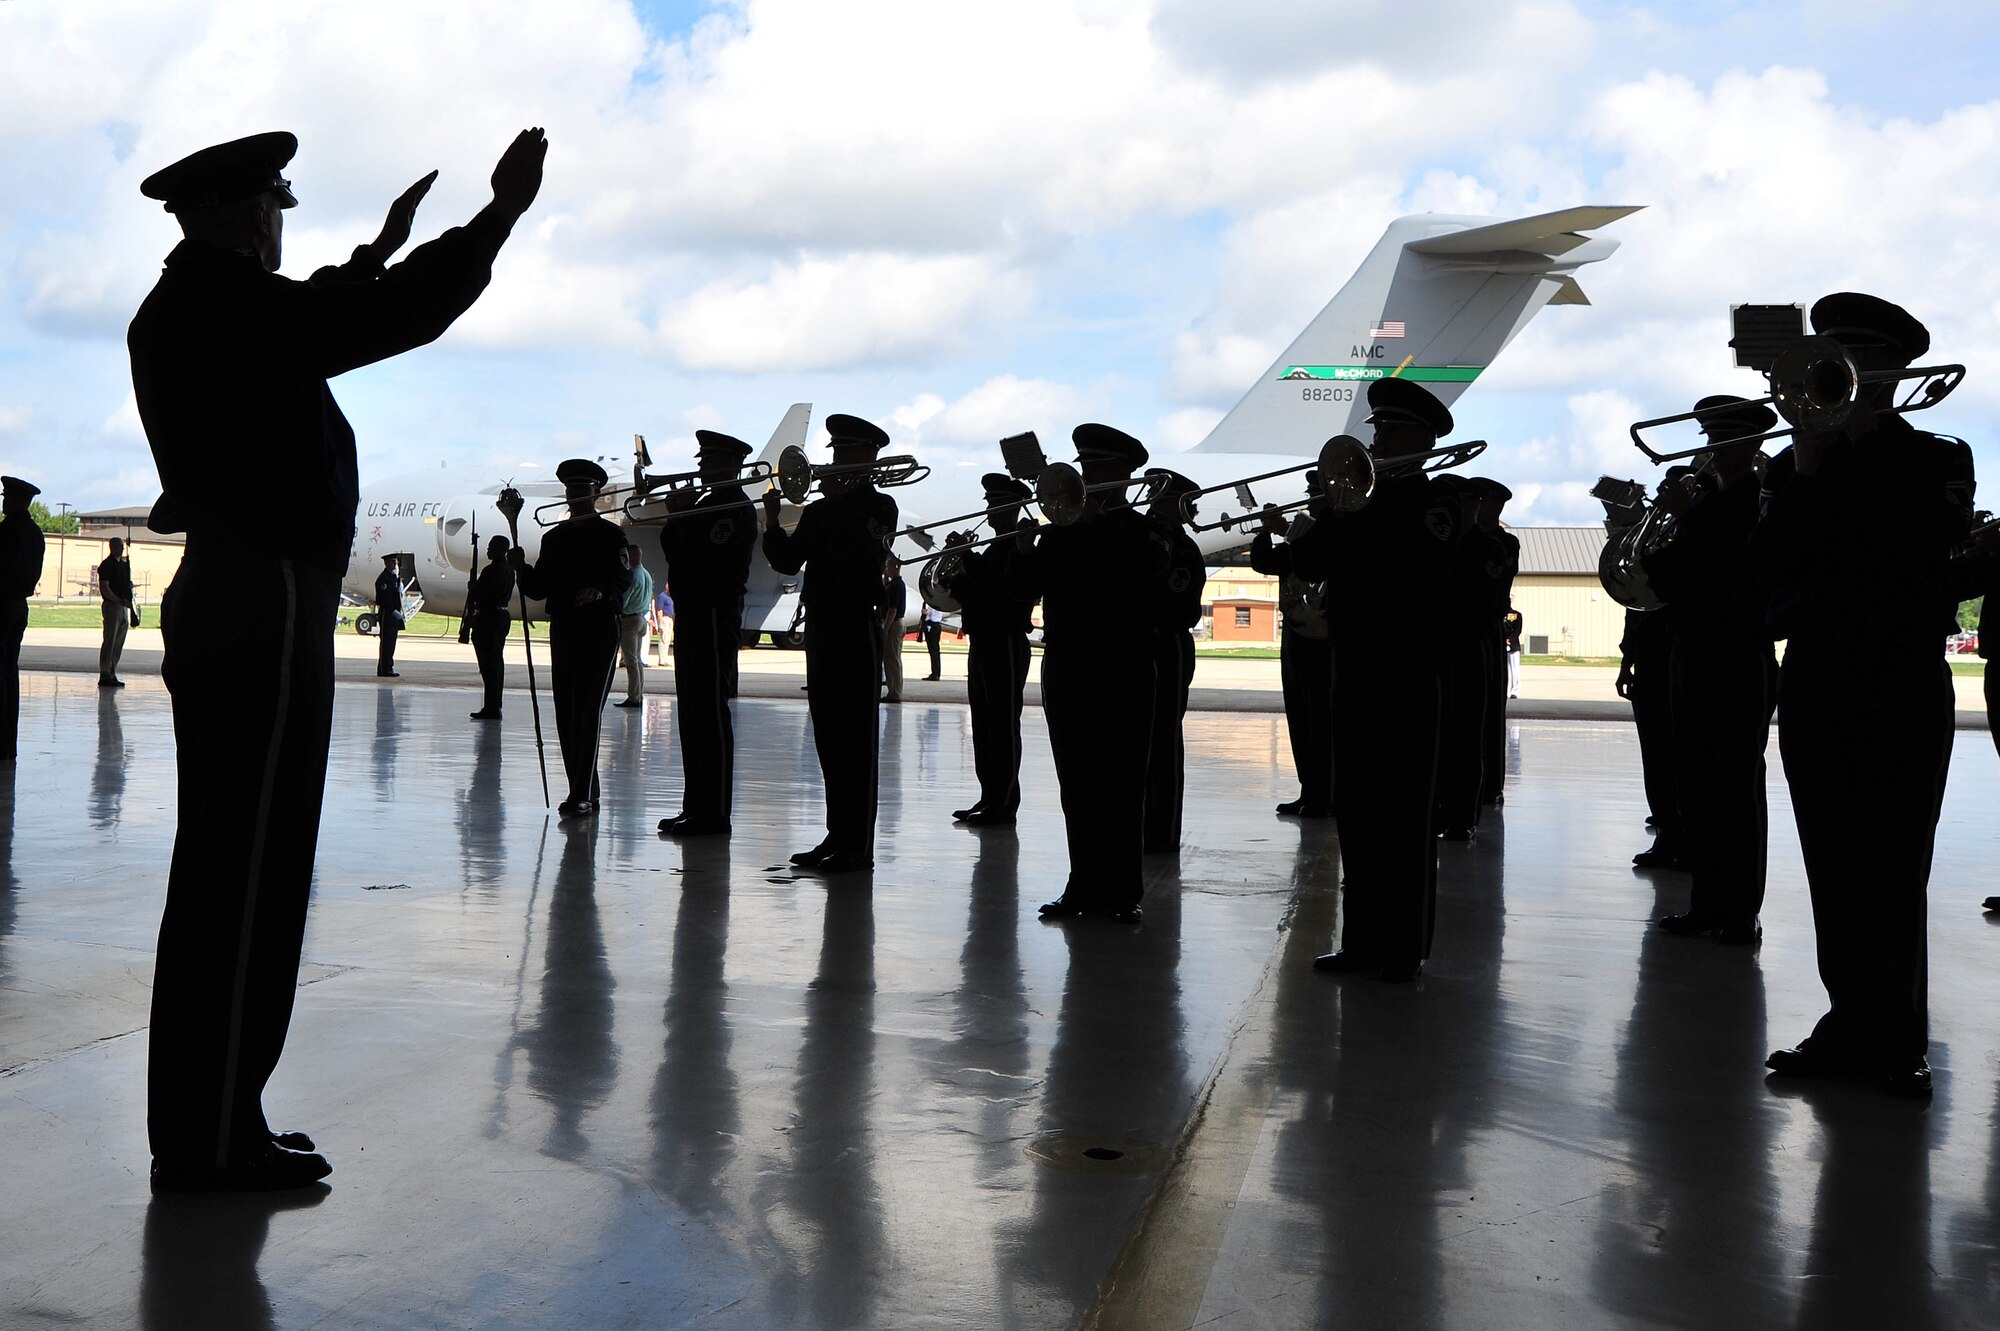 The United States Air Force Band Commander Col. Larry Lang conducts the Ceremonial Brass during a dignified transfer ceremony Sept. 14 at Joint Base Andrews, Md. The ceremony honored U.S. Foreign Service members killed on Sept. 11, 2012, at the U.S. embassy in Benghazi, Libya. President Barack Obama and Secretary of State Hillary Rodham Clinton honored the four American patriots during the ceremony with comments about their military and diplomatic backgrounds and contributions to international diplomacy. (U.S. Air Force photo by Senior Airman Steele C. G. Britton)